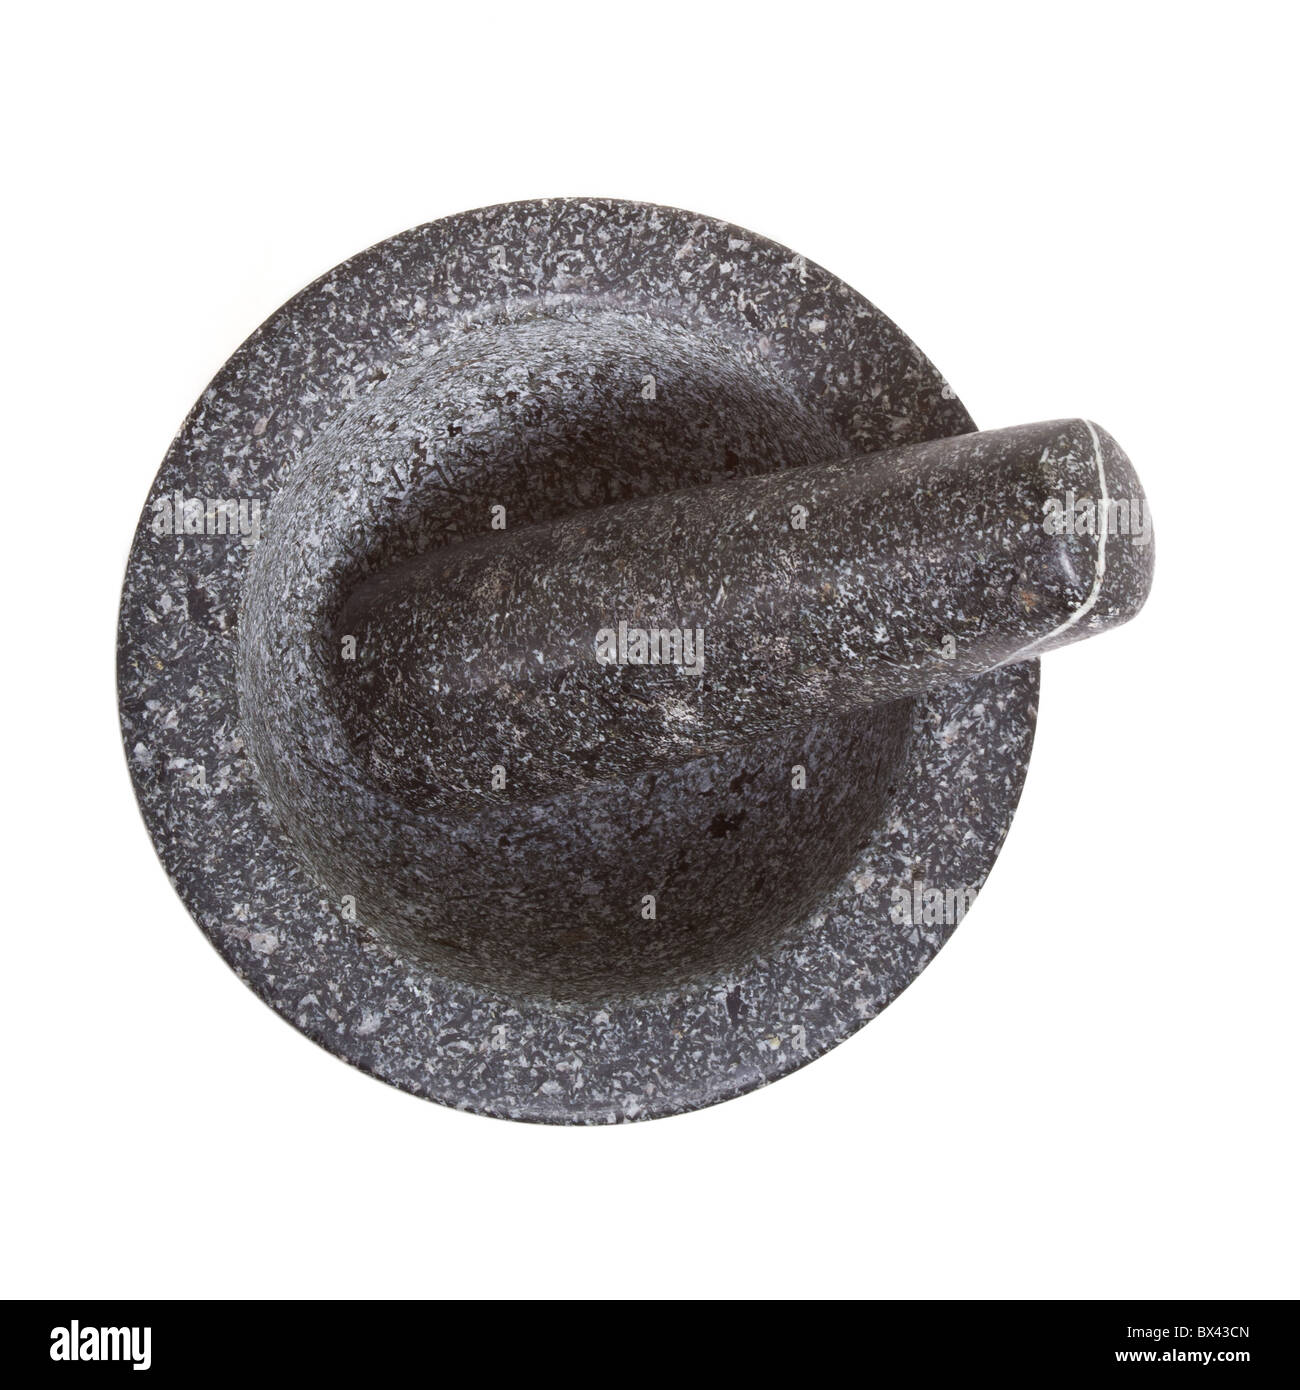 Veined Granite Mortar and Pestle isolated on white background. Stock Photo